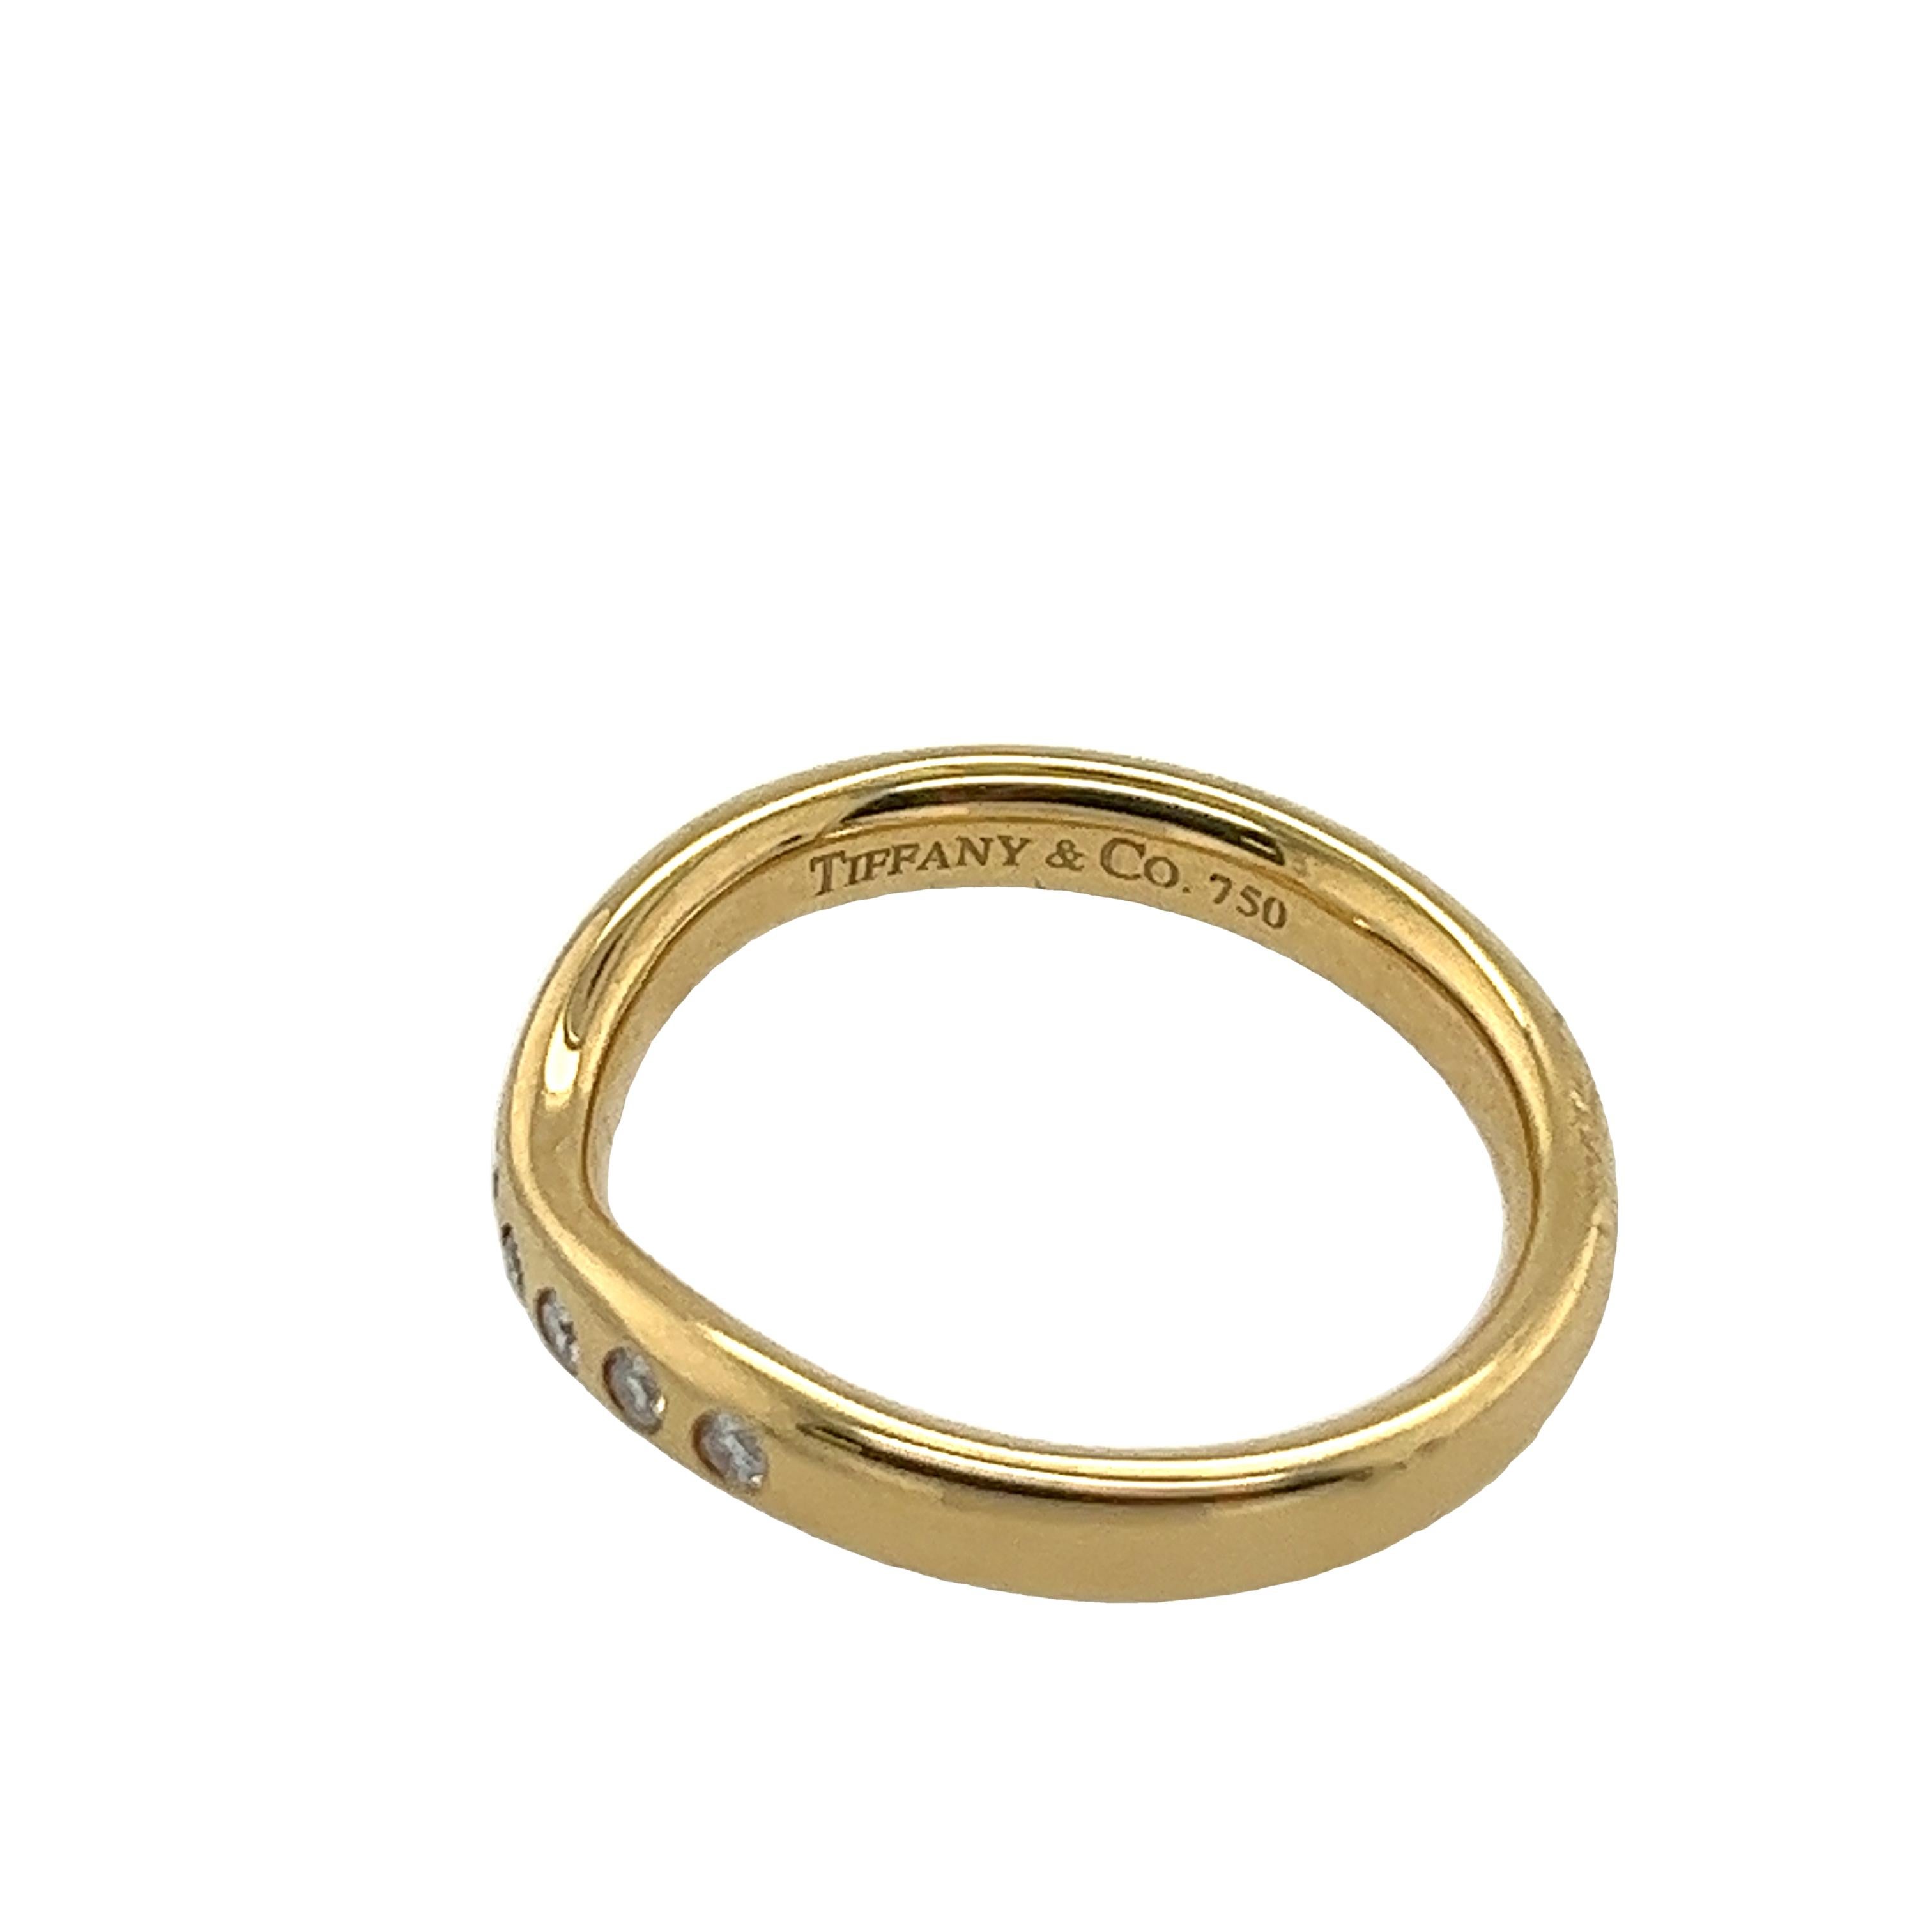 Exuding grace and sophistication, the Tiffany & Co. Elsa Peretti Wedding Band is adorned with nine diamonds, set delicately in 18ct yellow gold. Each diamond reflects the eternal promise of love, creating a timeless symbol of commitment and